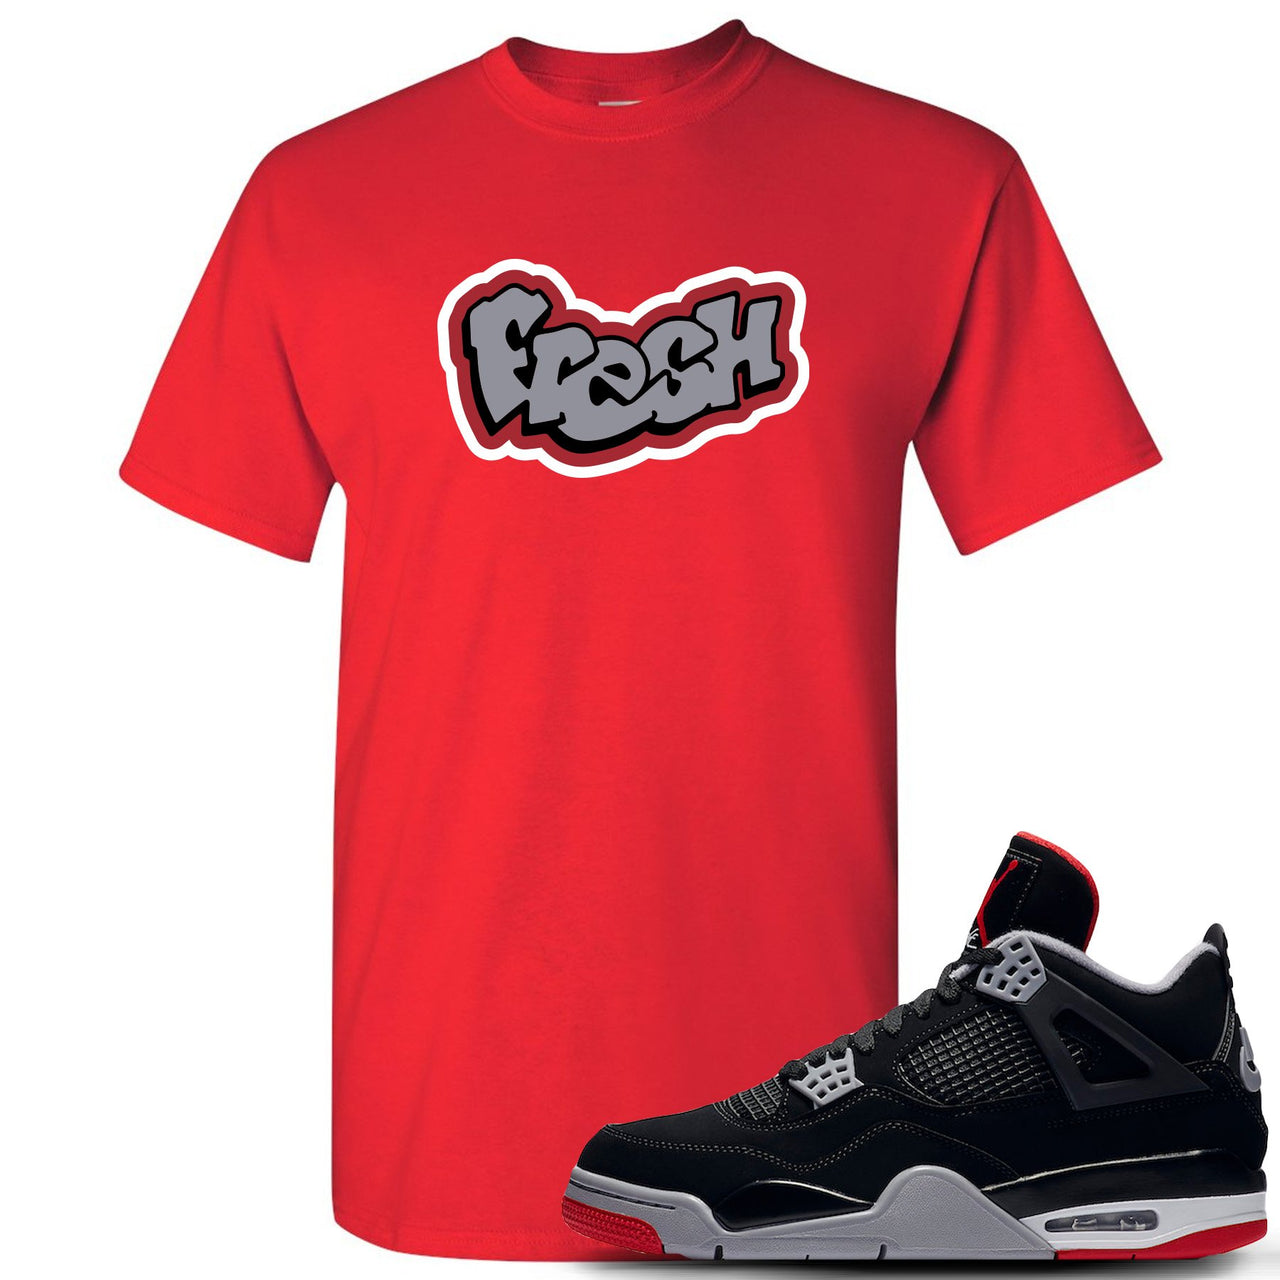 This red and grey t-shirt will match great with your Air Max Jordan 4 Bred shoes